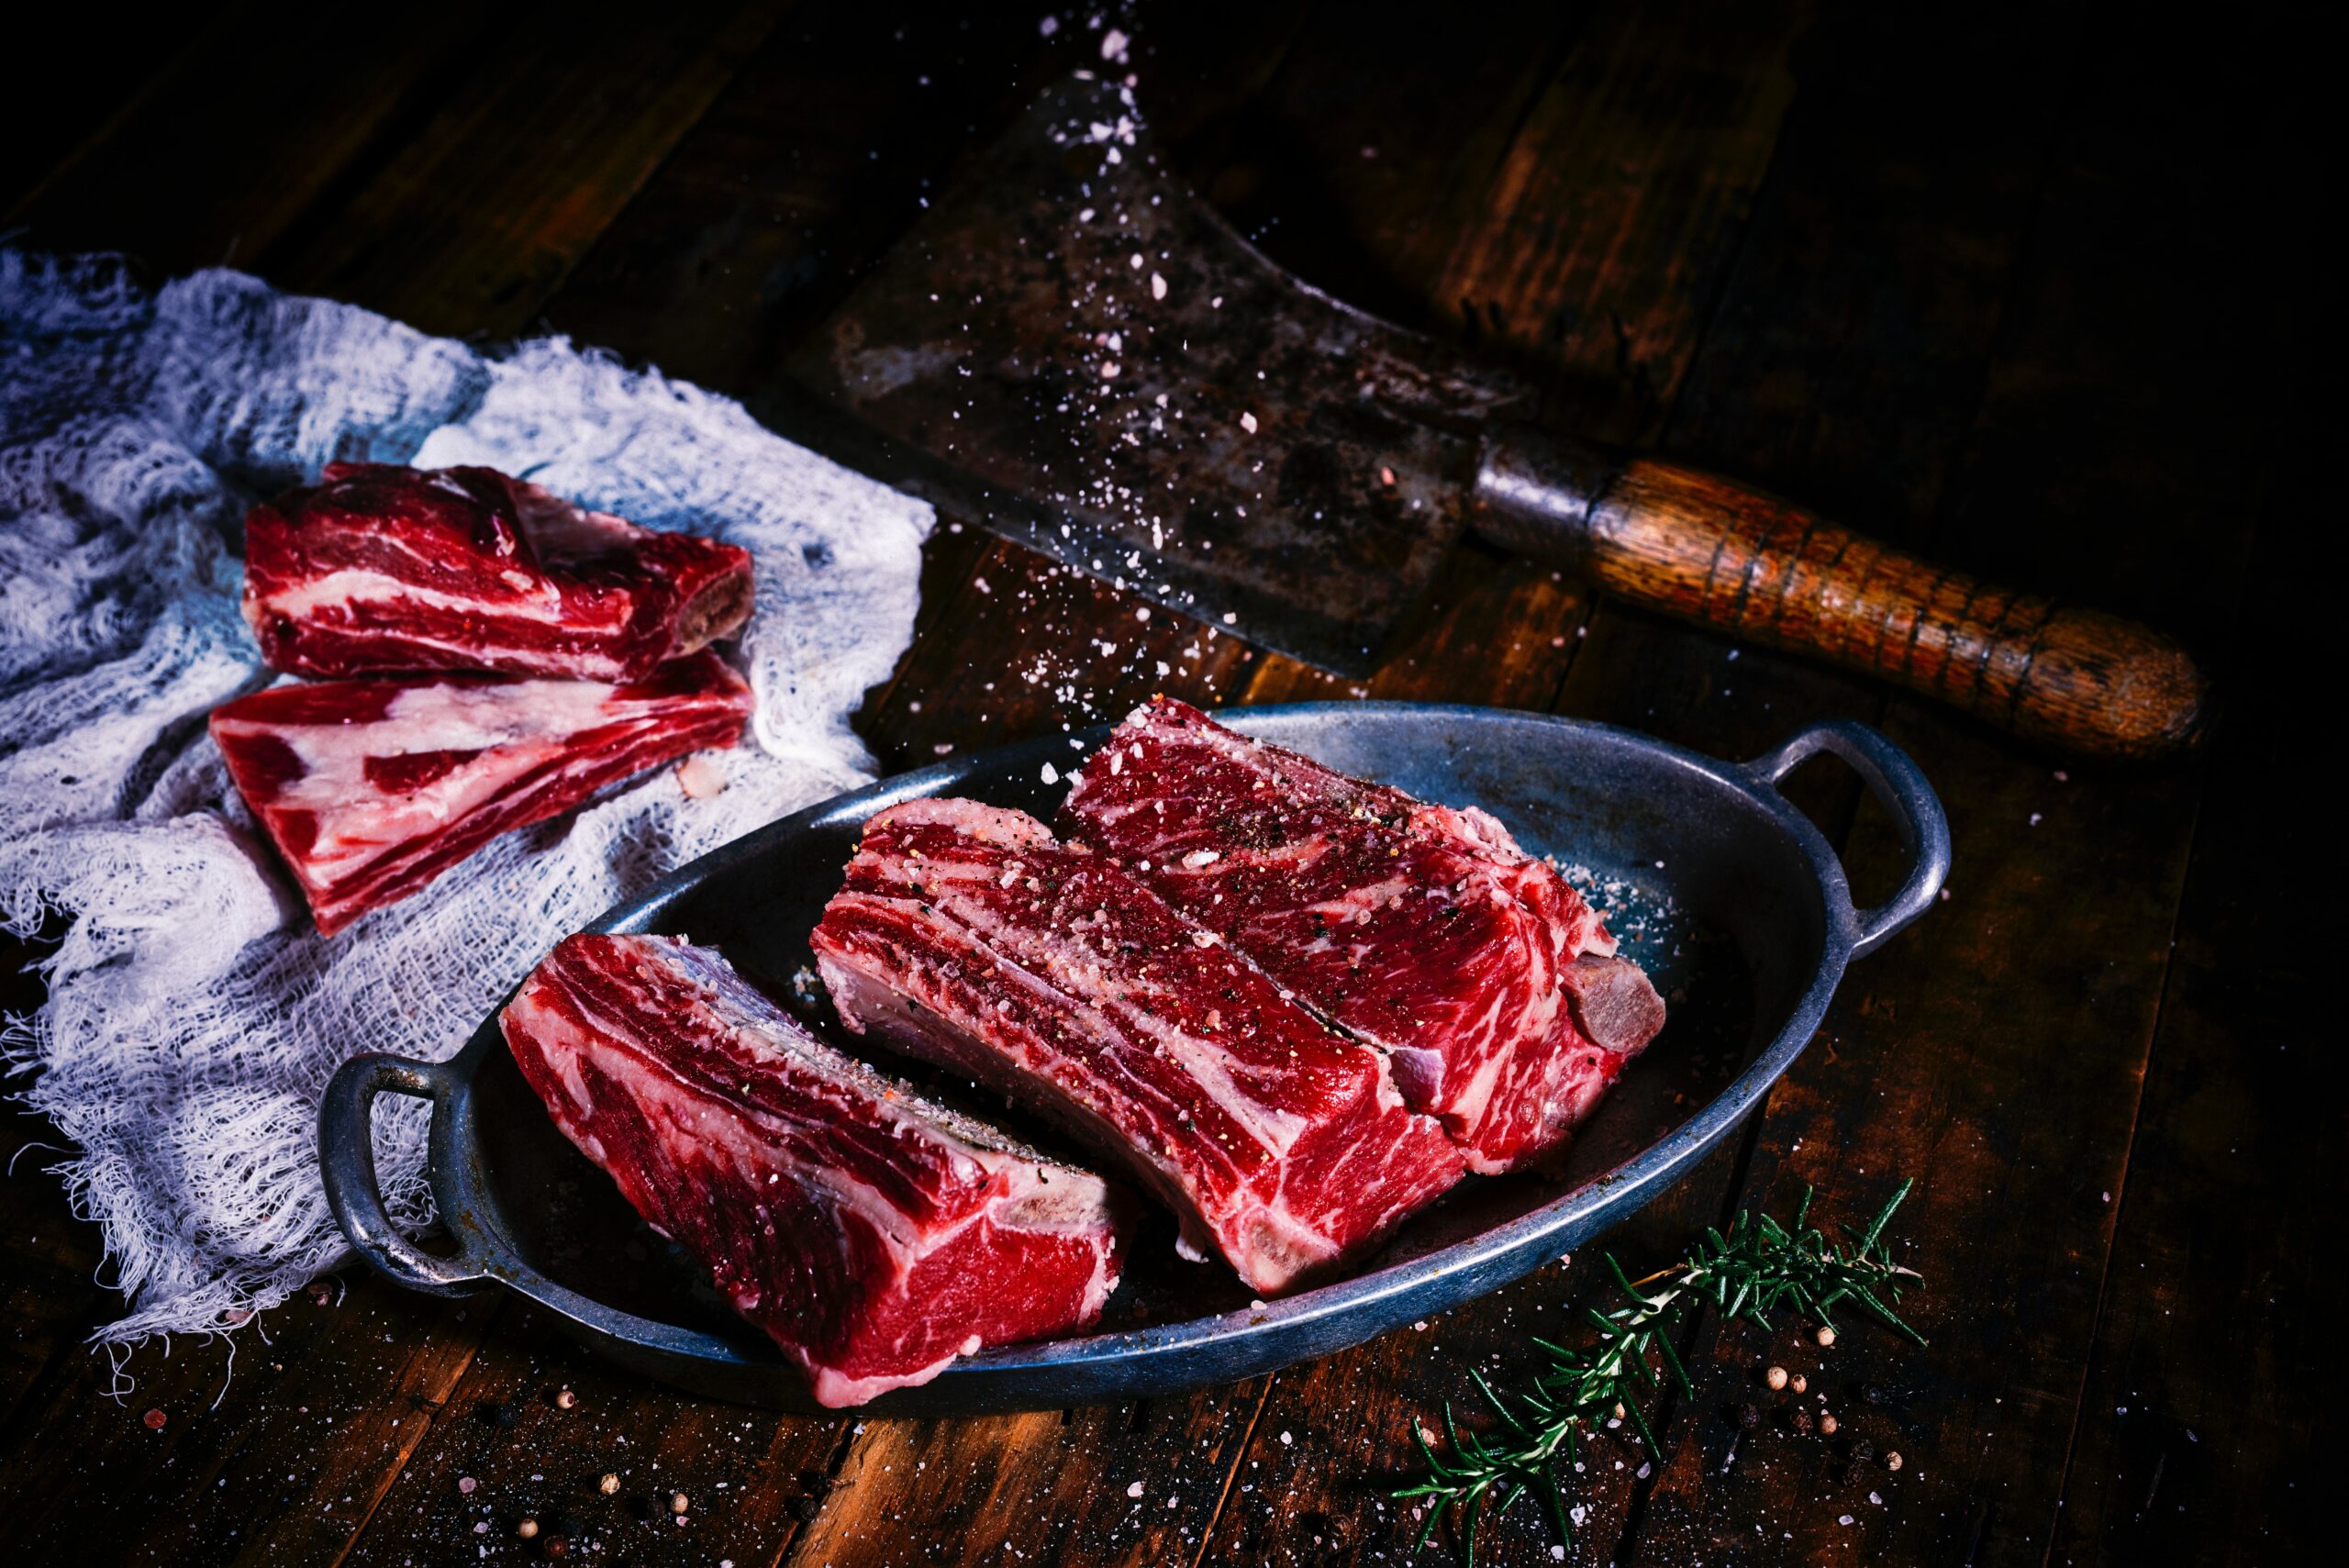 Short ribs, the perfect, cozy meal